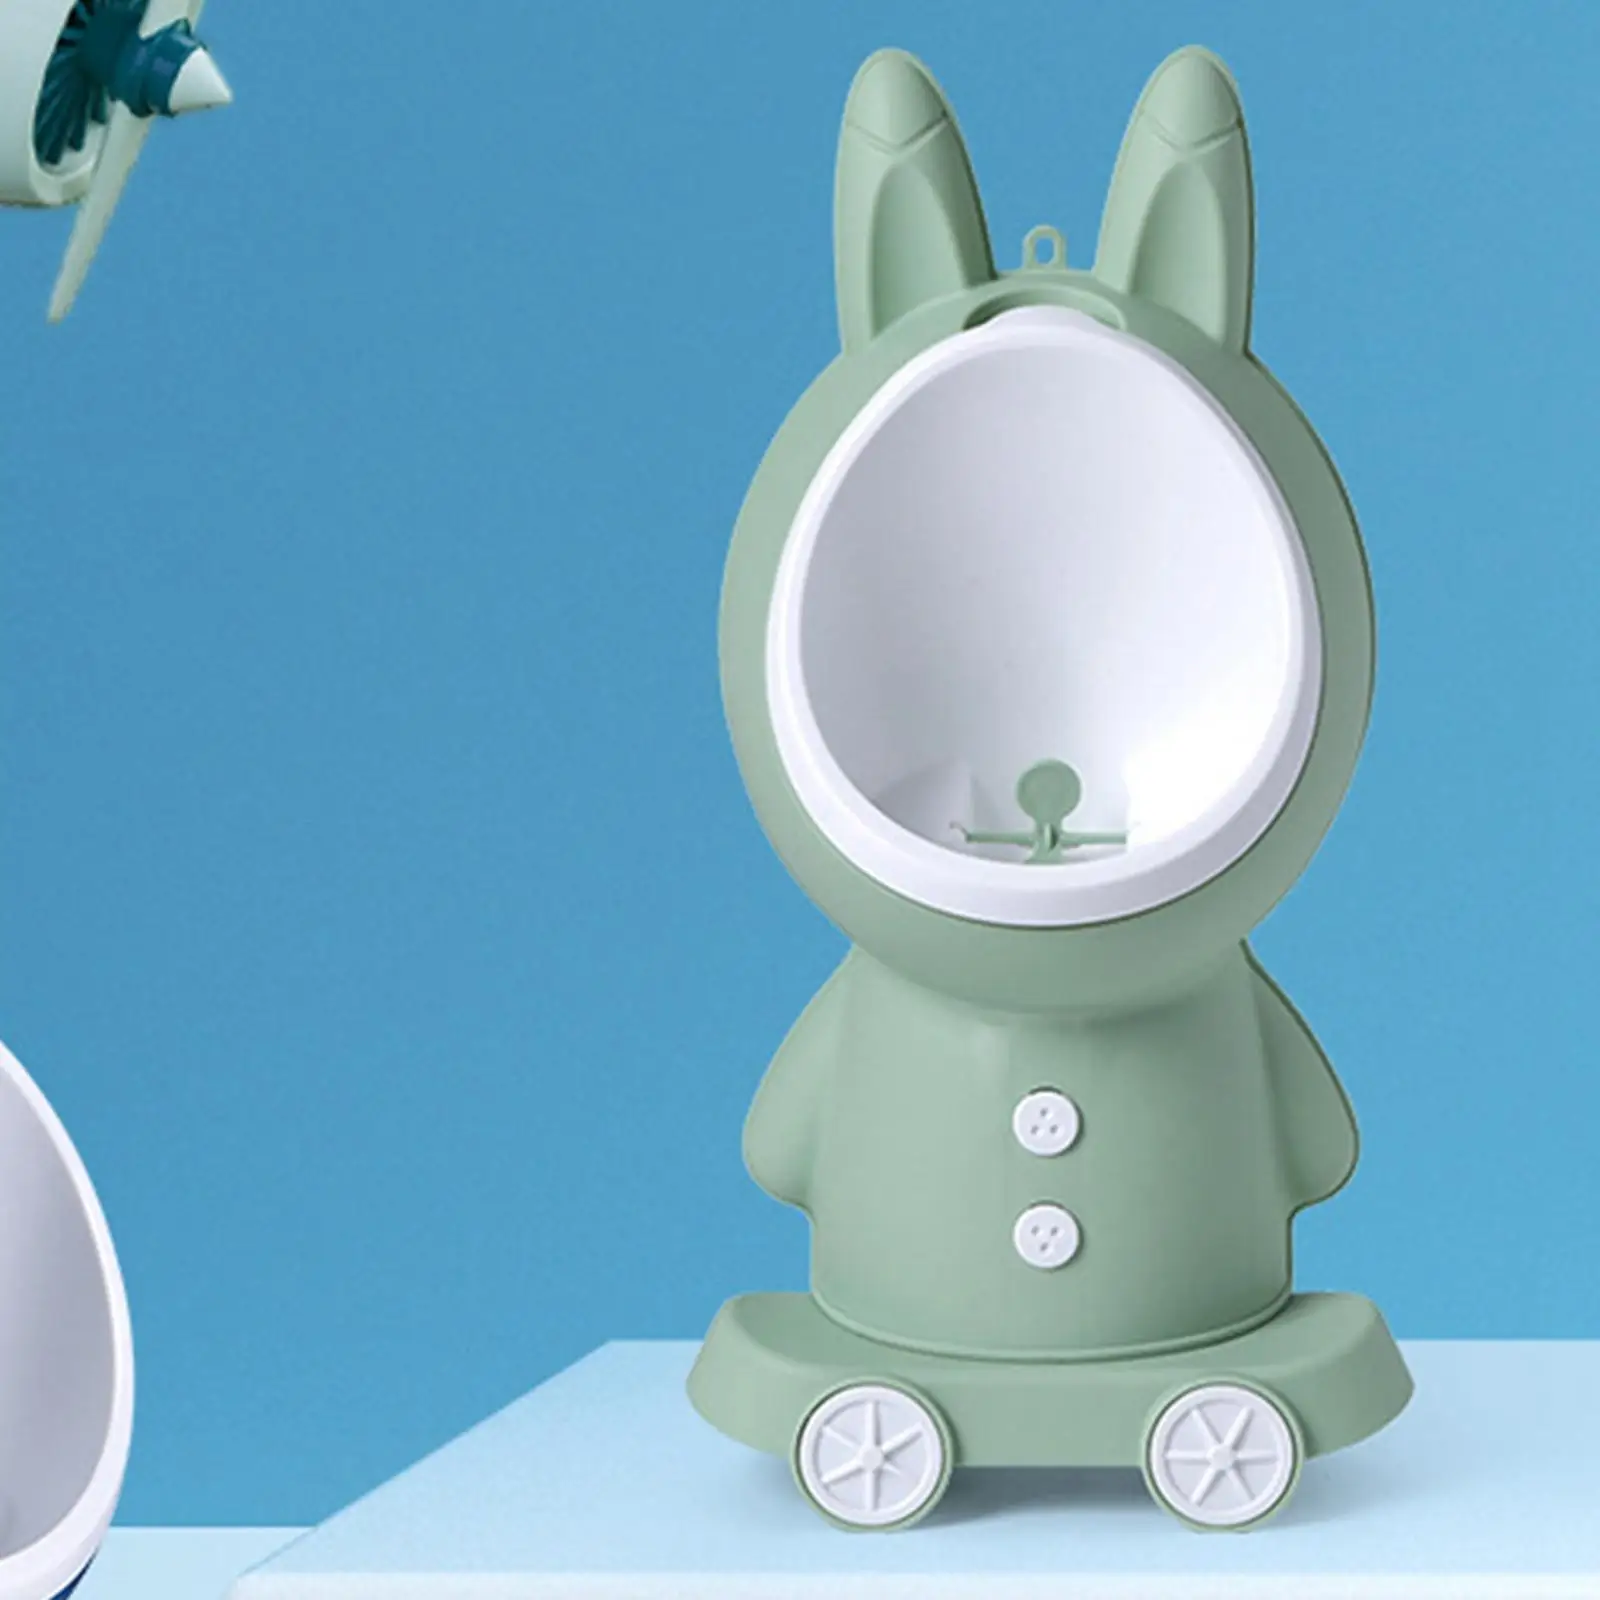 Cute Rabbit Little Boys Pee Toilet Kids Potty Urinal to 6 Years Old